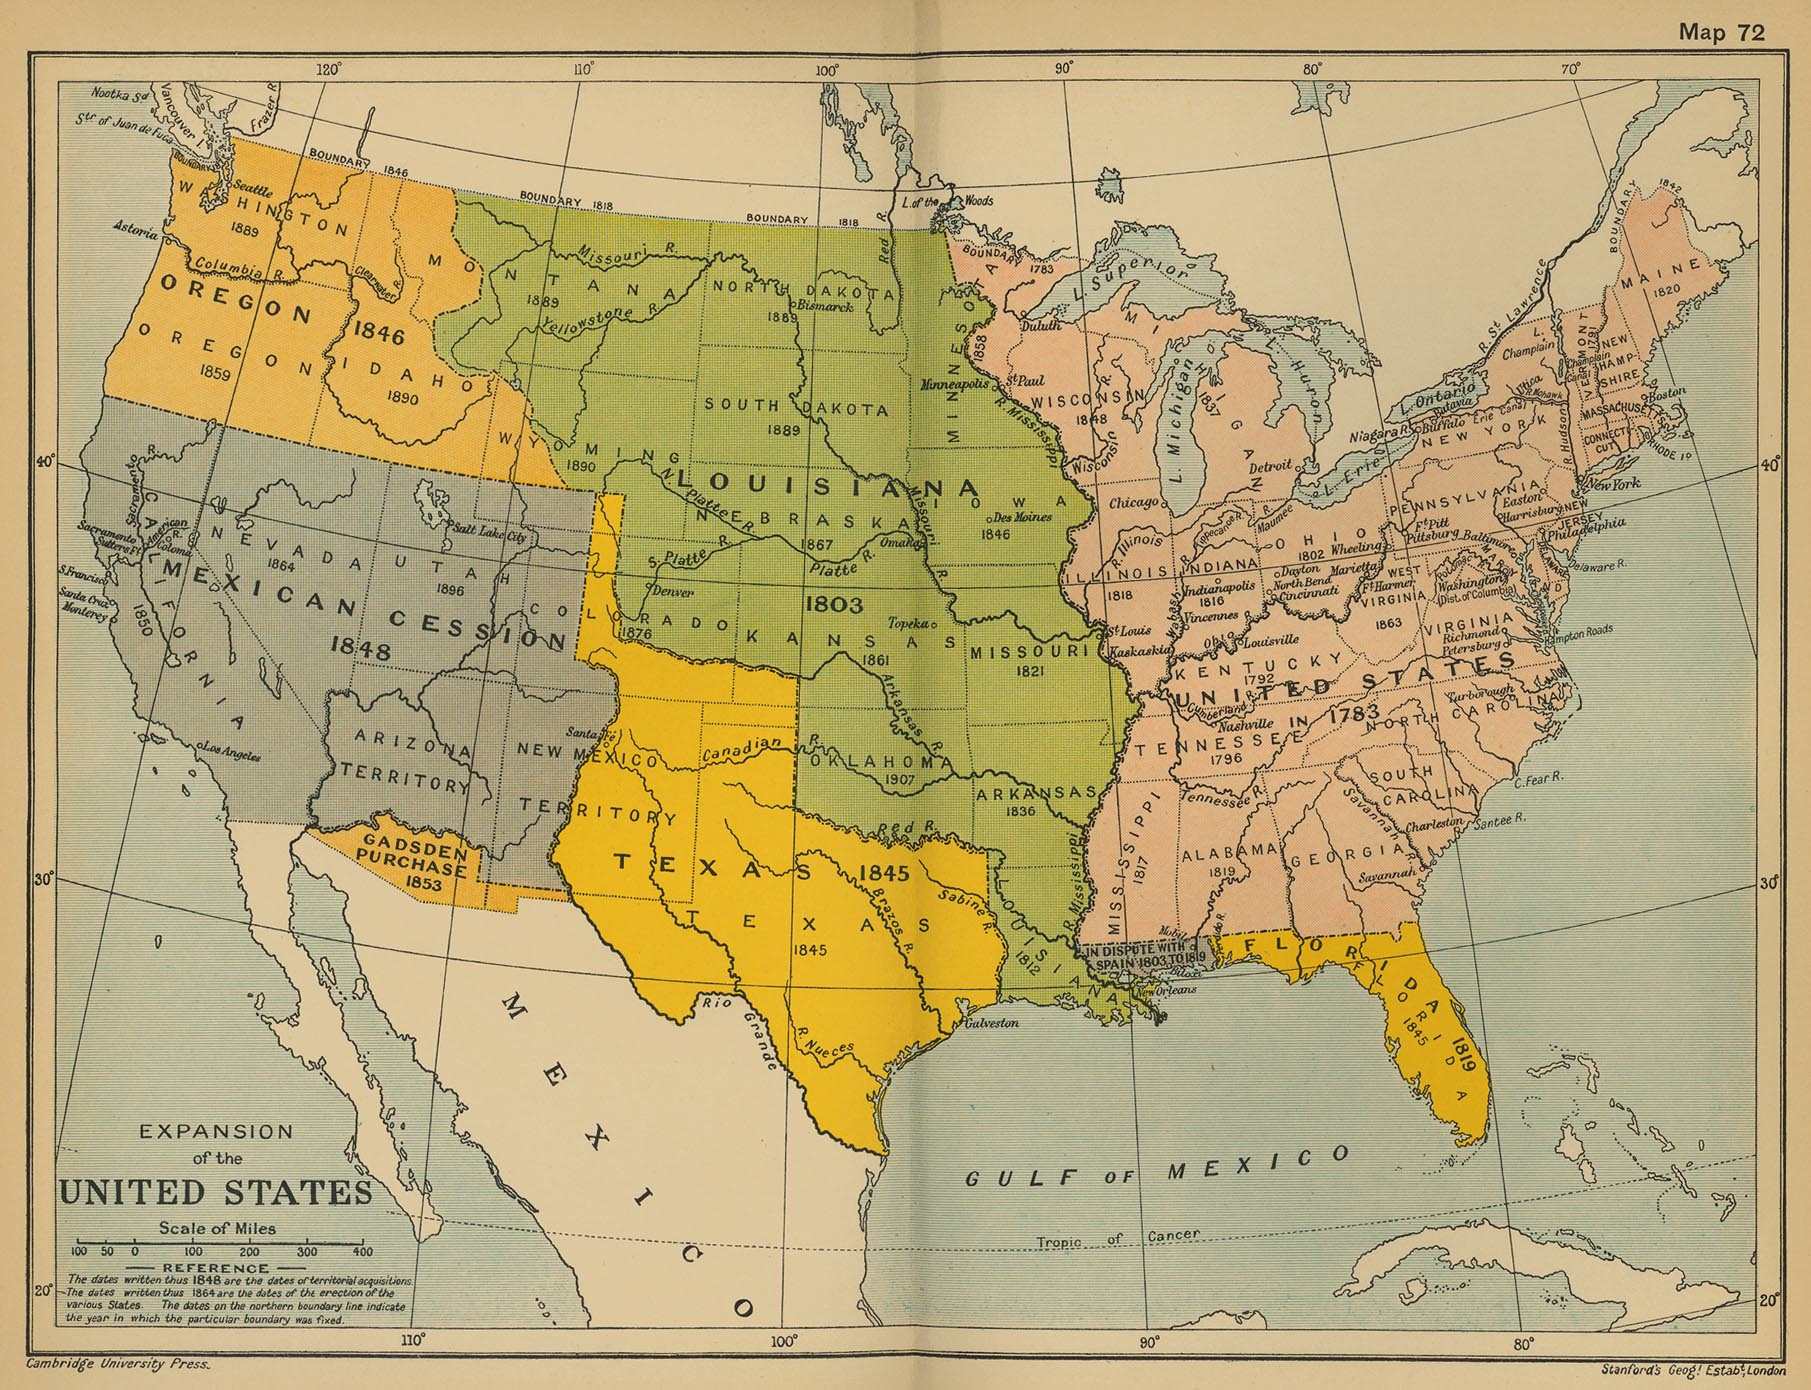 Map of the Expansion of the United States 1783-1907